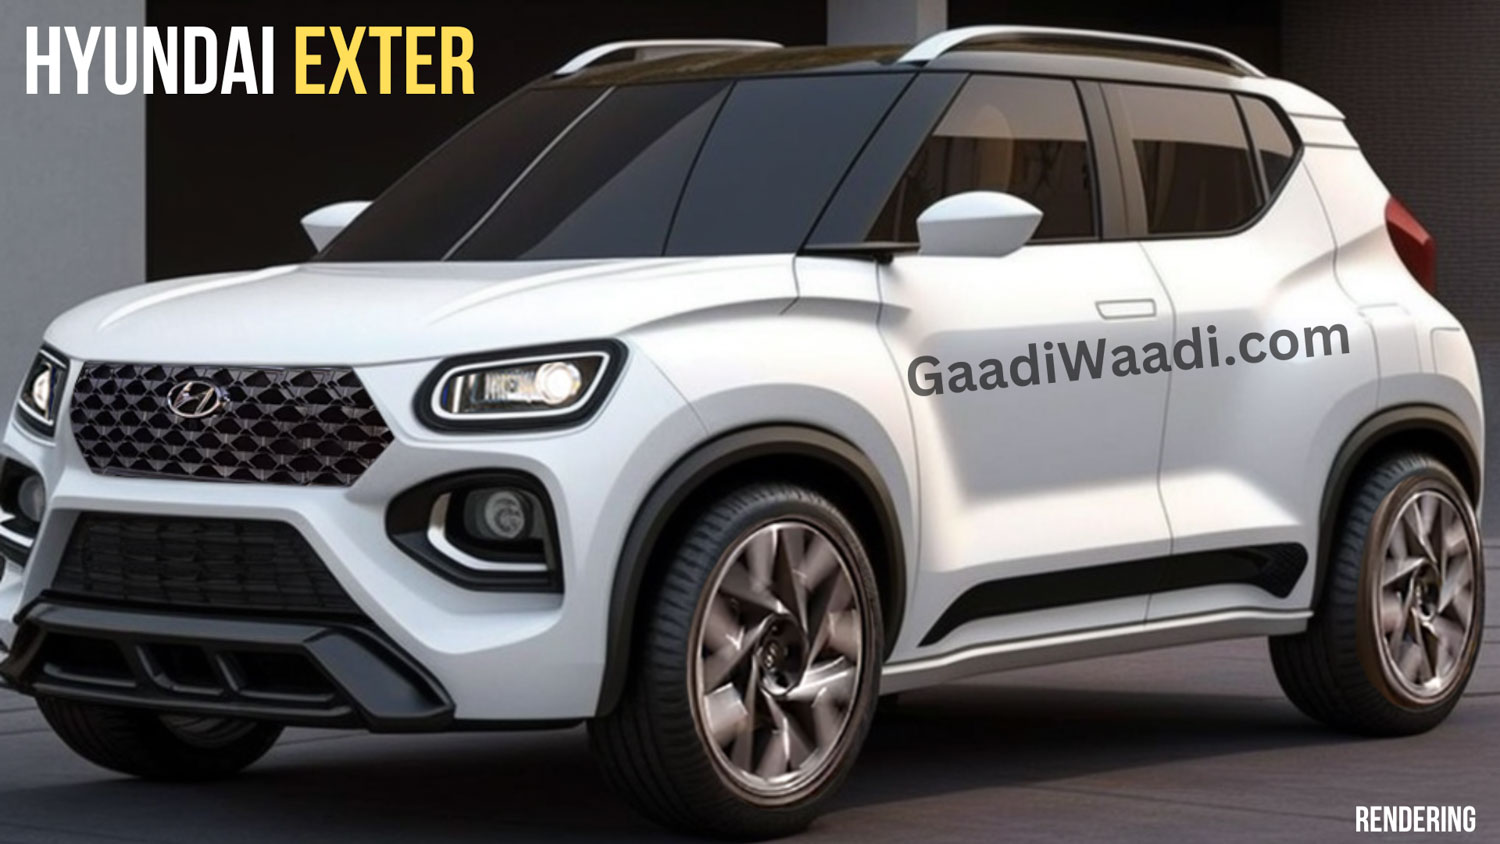 breaking-news-hyundai-exter-is-the-name-of-upcoming-suv